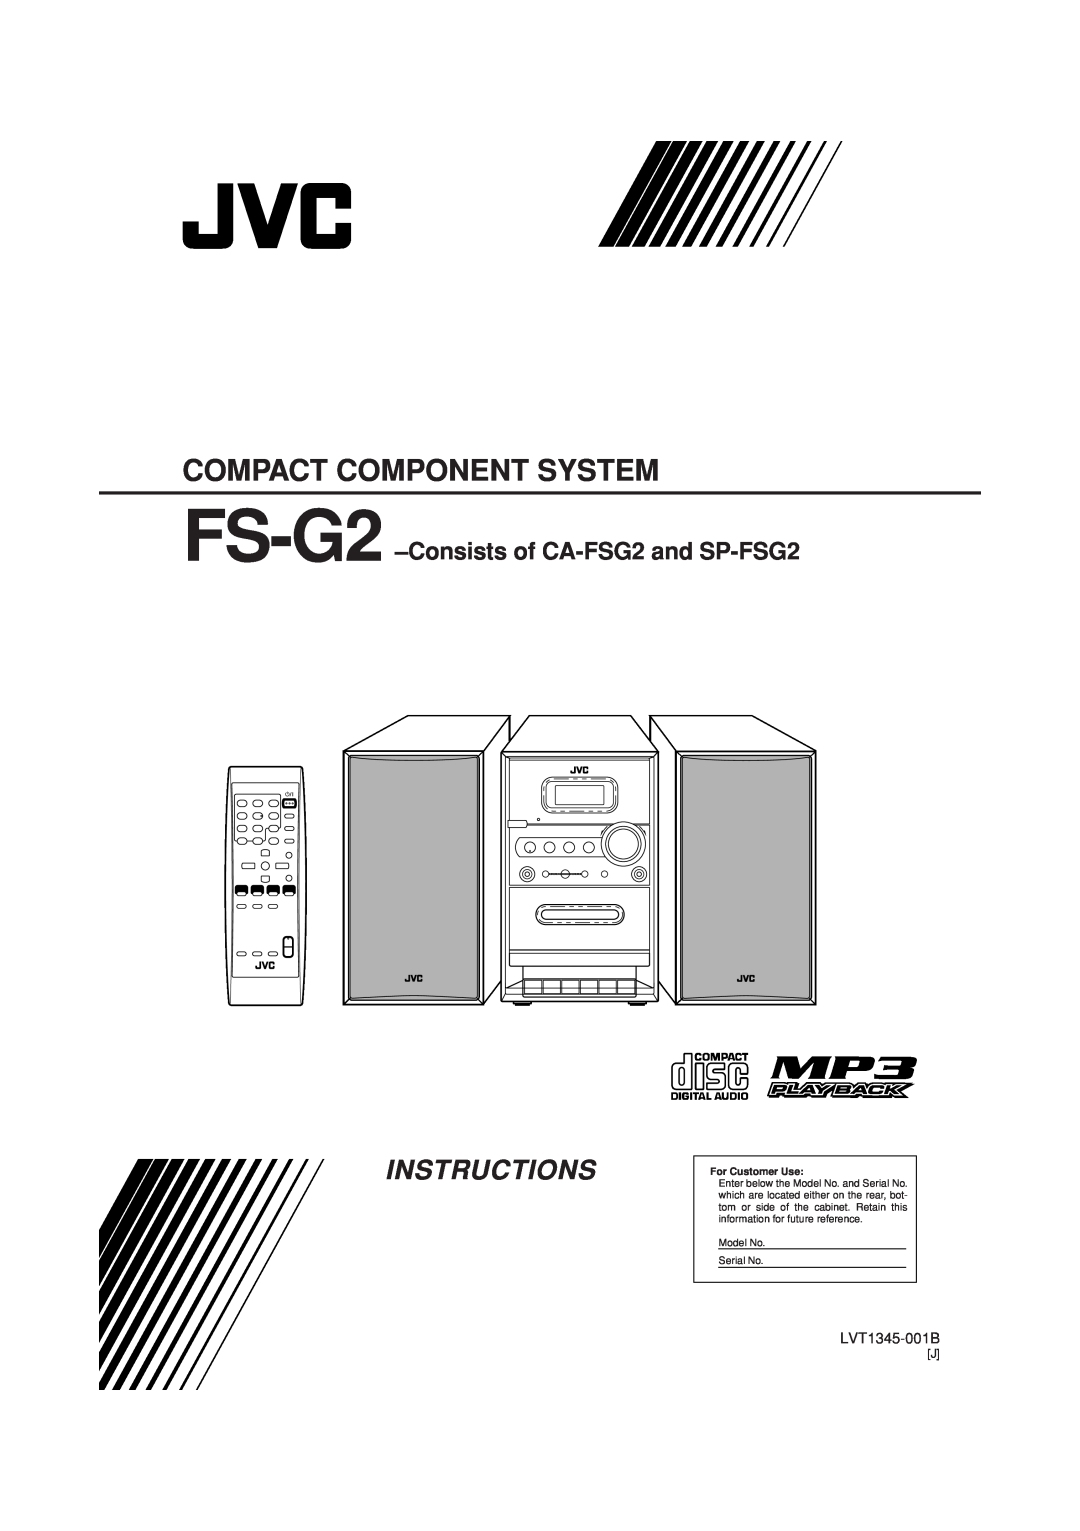 JVC manual Compact Component System, Instructions, FS-G2 -Consistsof CA-FSG2and SP-FSG2, LVT1345-001B, For Customer Use 